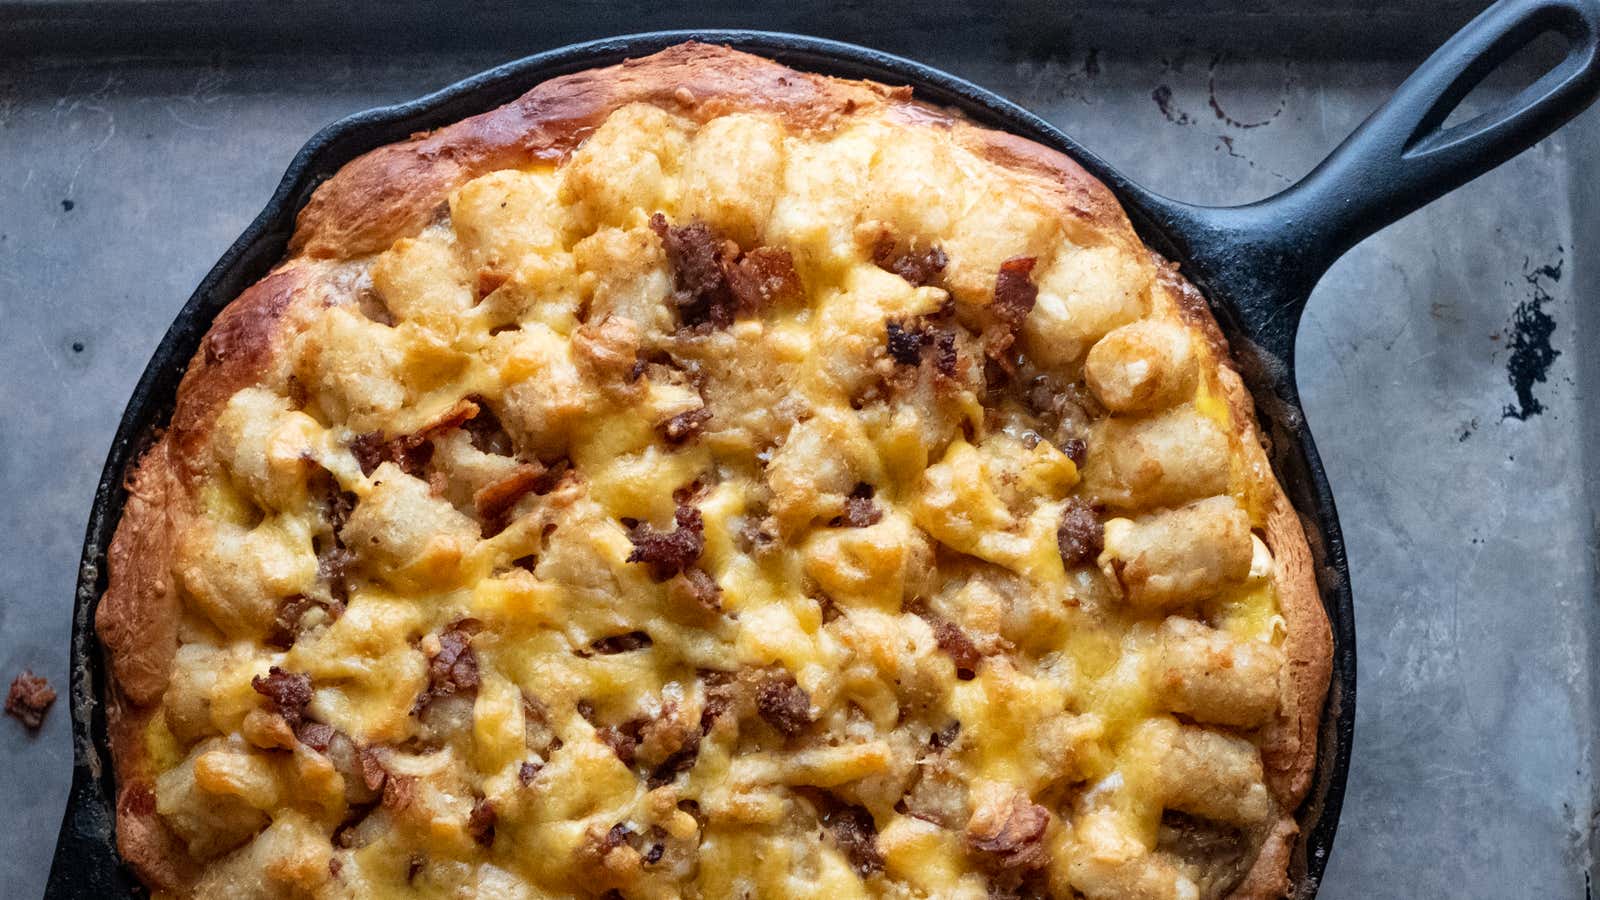 I Turned Garth Brooks' Breakfast Bowl Into a Casserole and I Would Do It Again